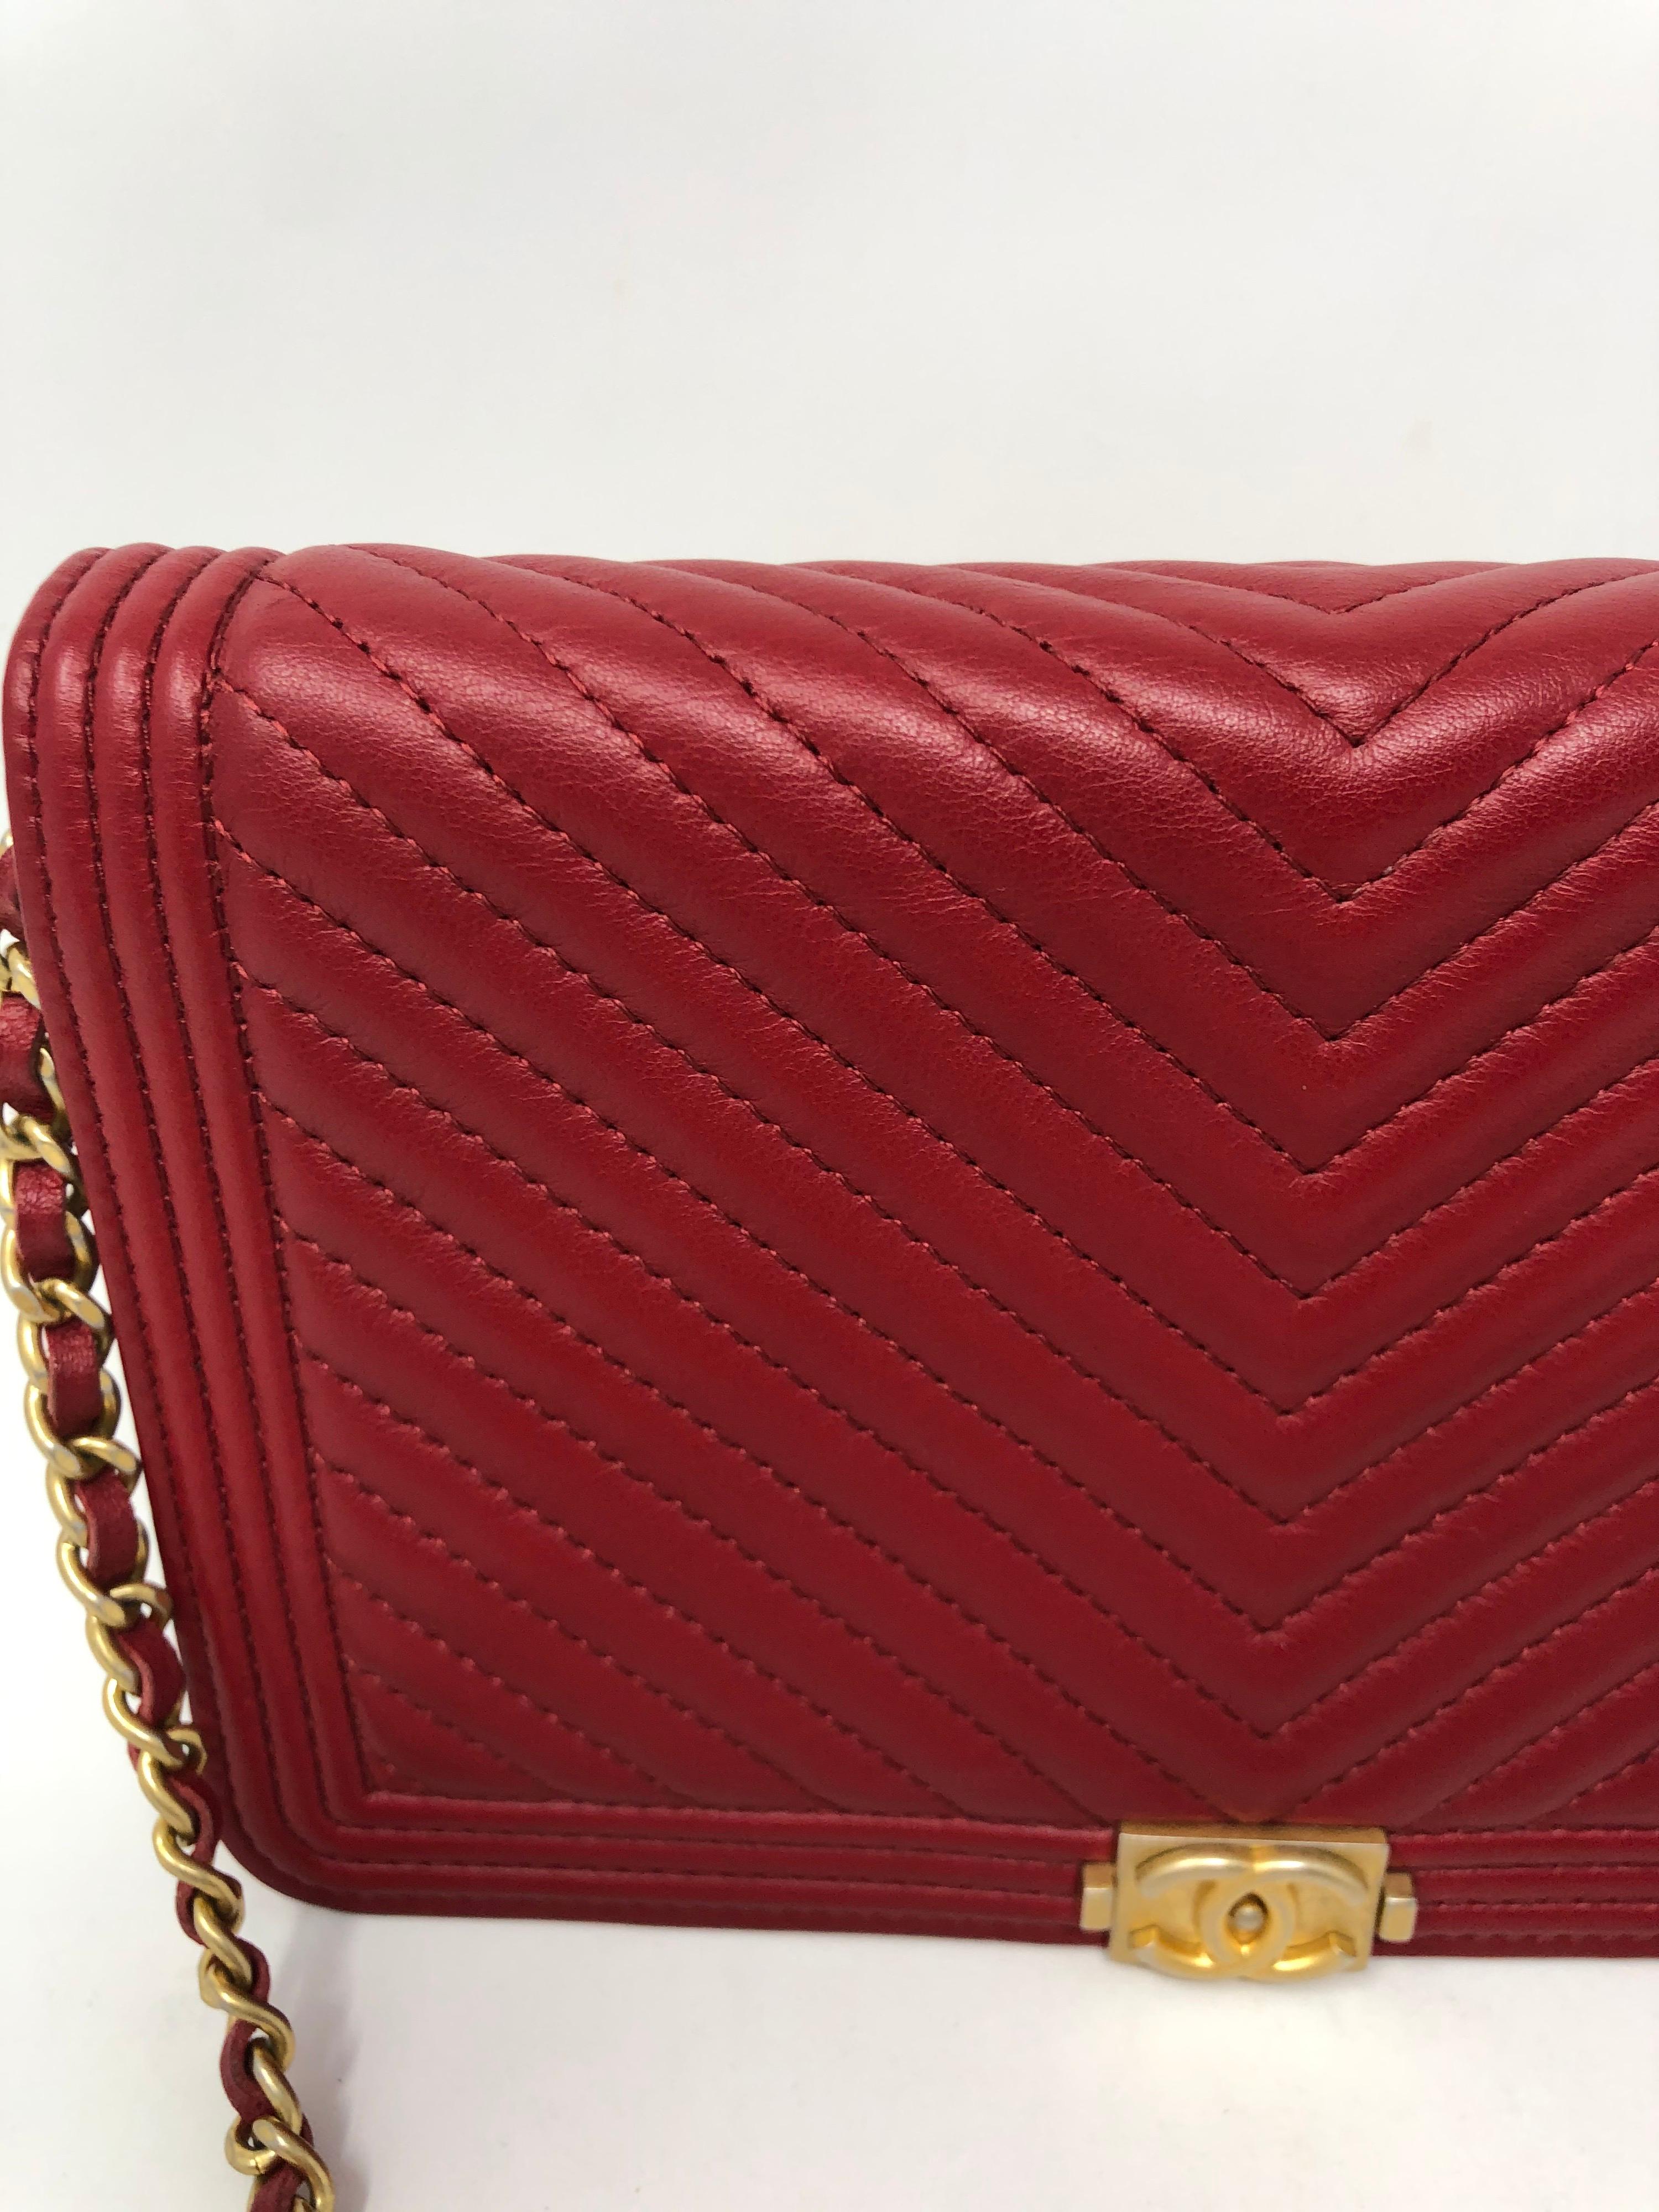 Chanel Red Boy Wallet On A Chain Bag 2